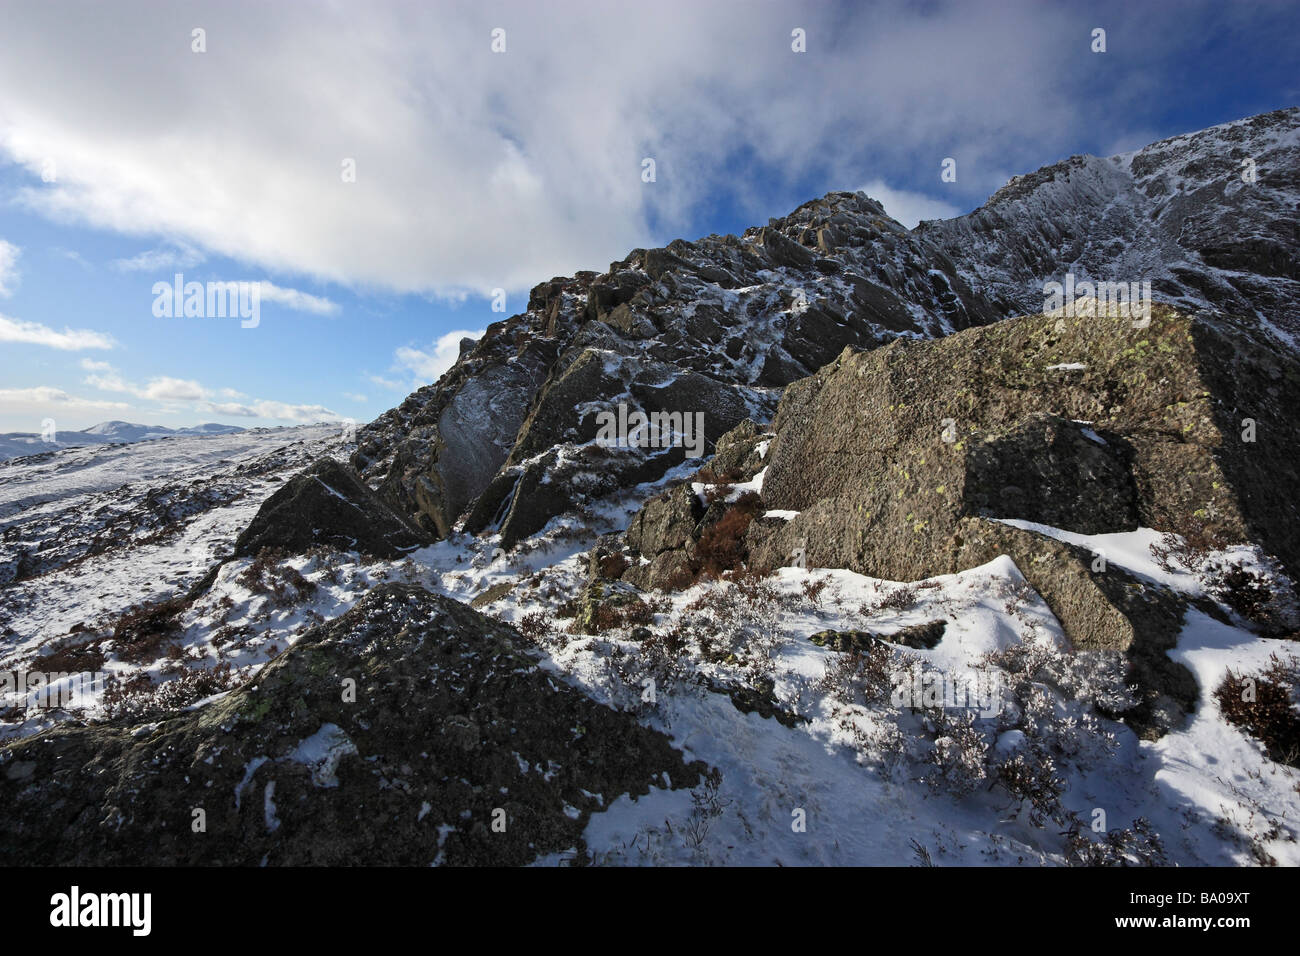 The Daear Ddu east ridge ascent route to Moel Siabod, Snowdonia Stock Photo